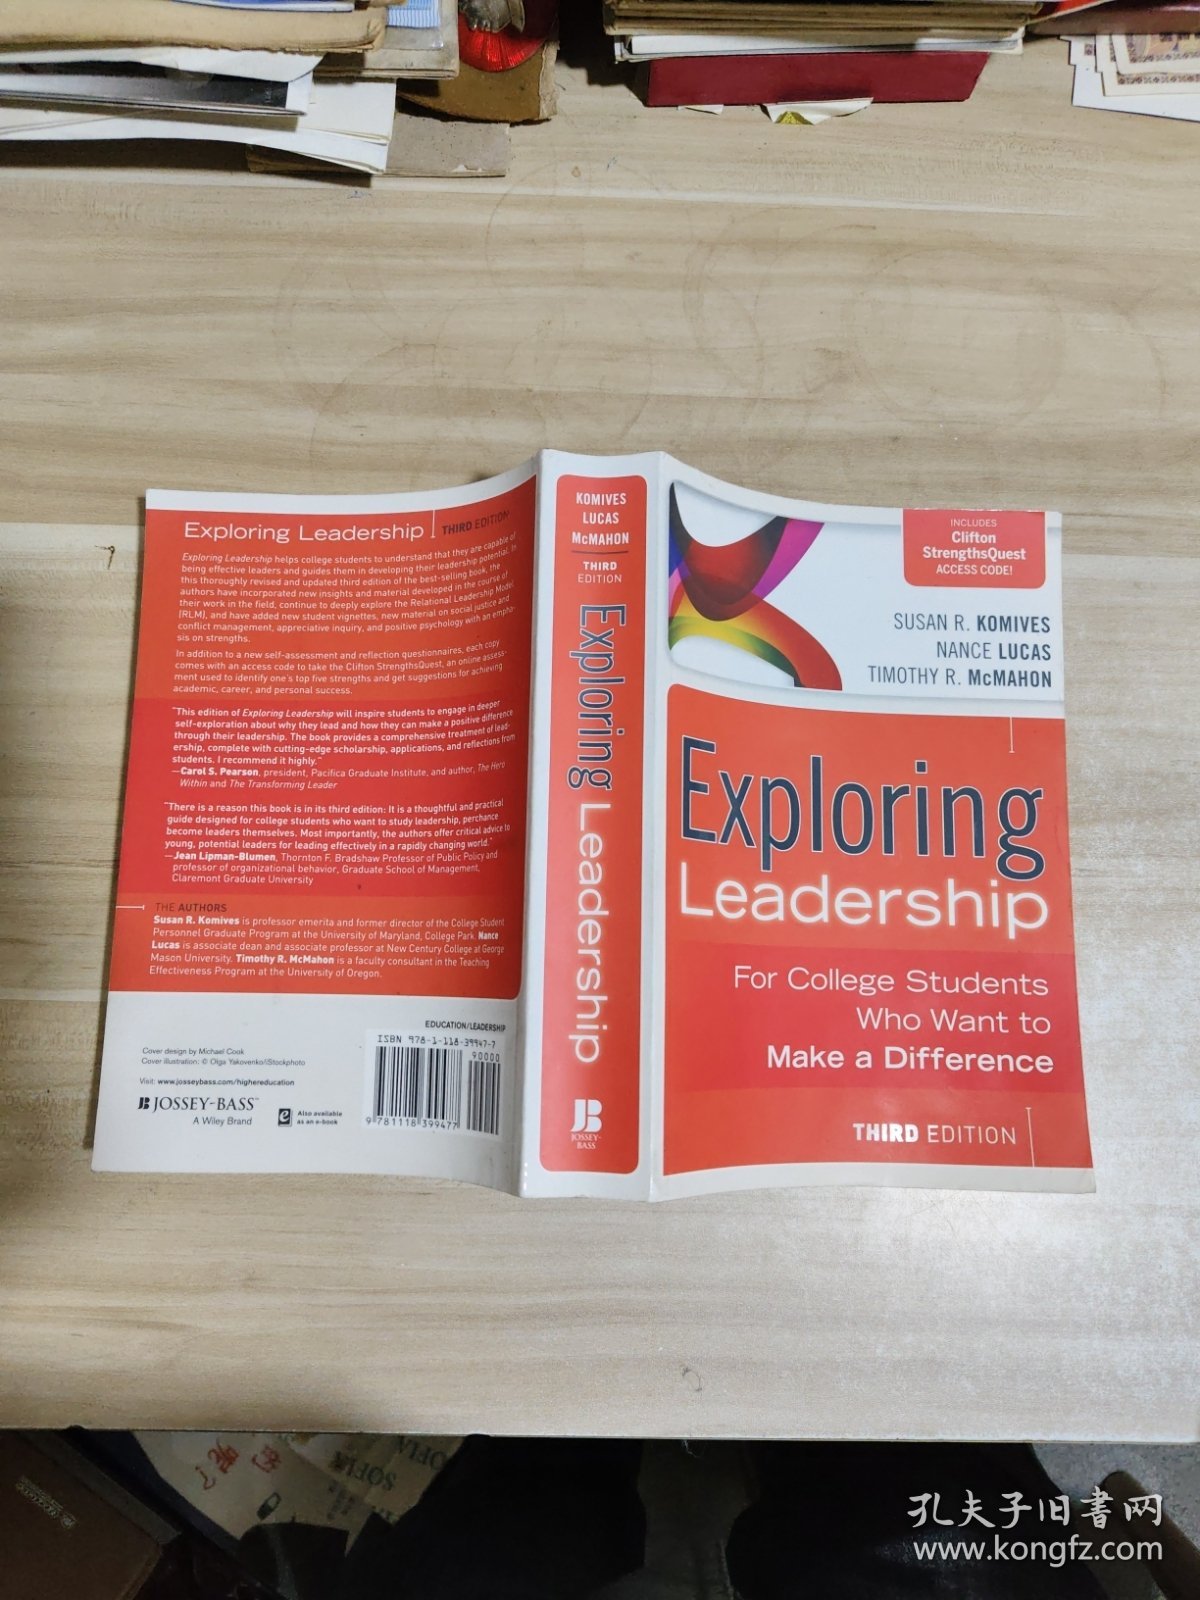 Exploring Leadership For College Students Who Want to Make a Difference THIRD EDITION